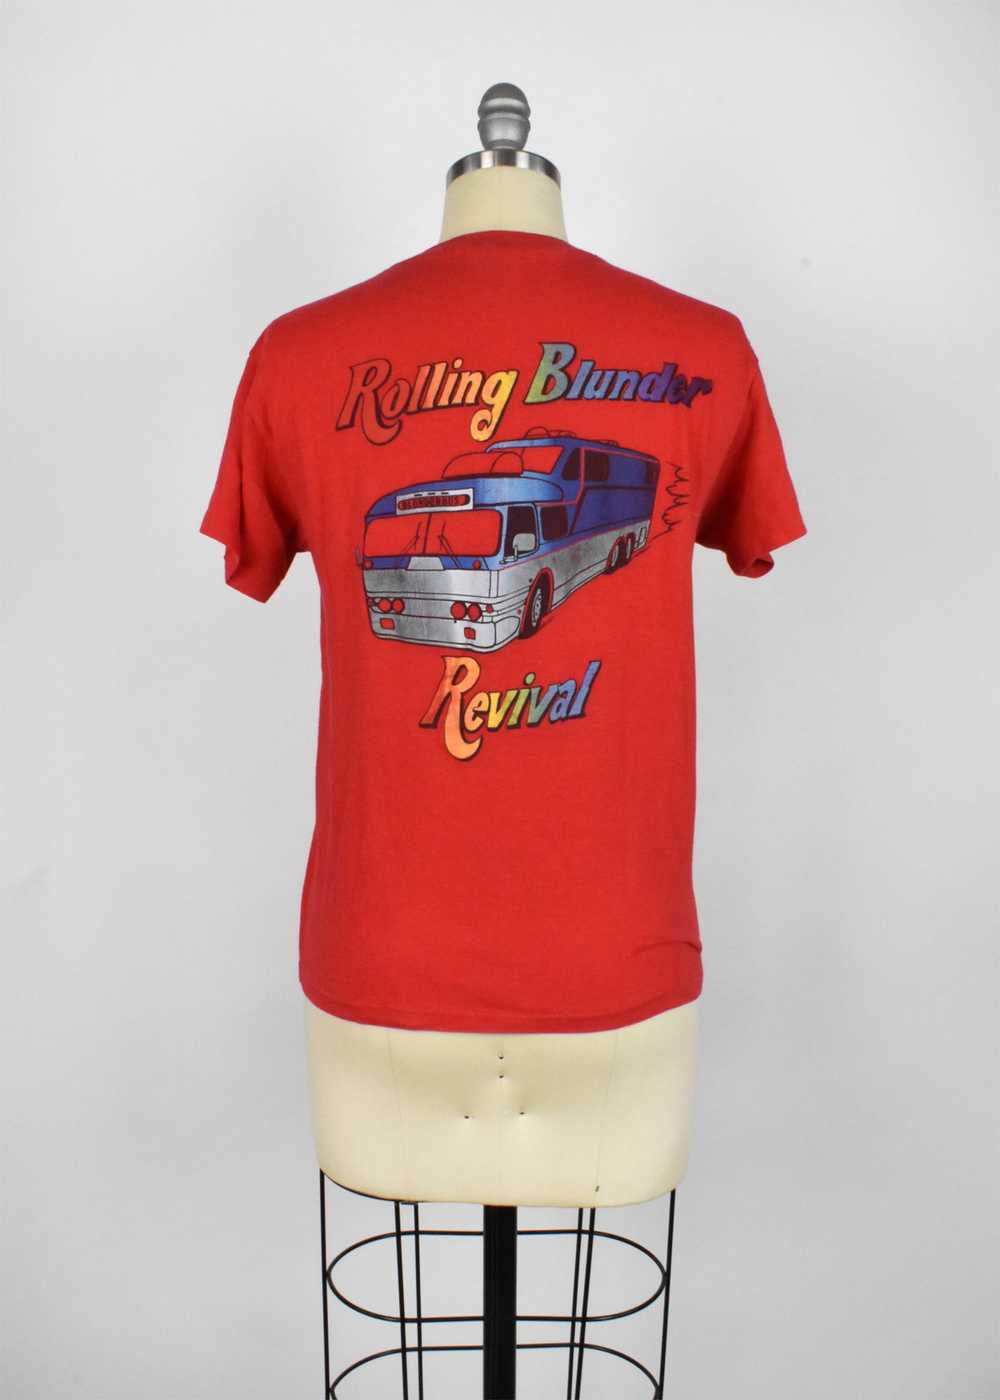 Arlo Guthrie Rolling Blunder Revival 1984 Tour T-… - image 2